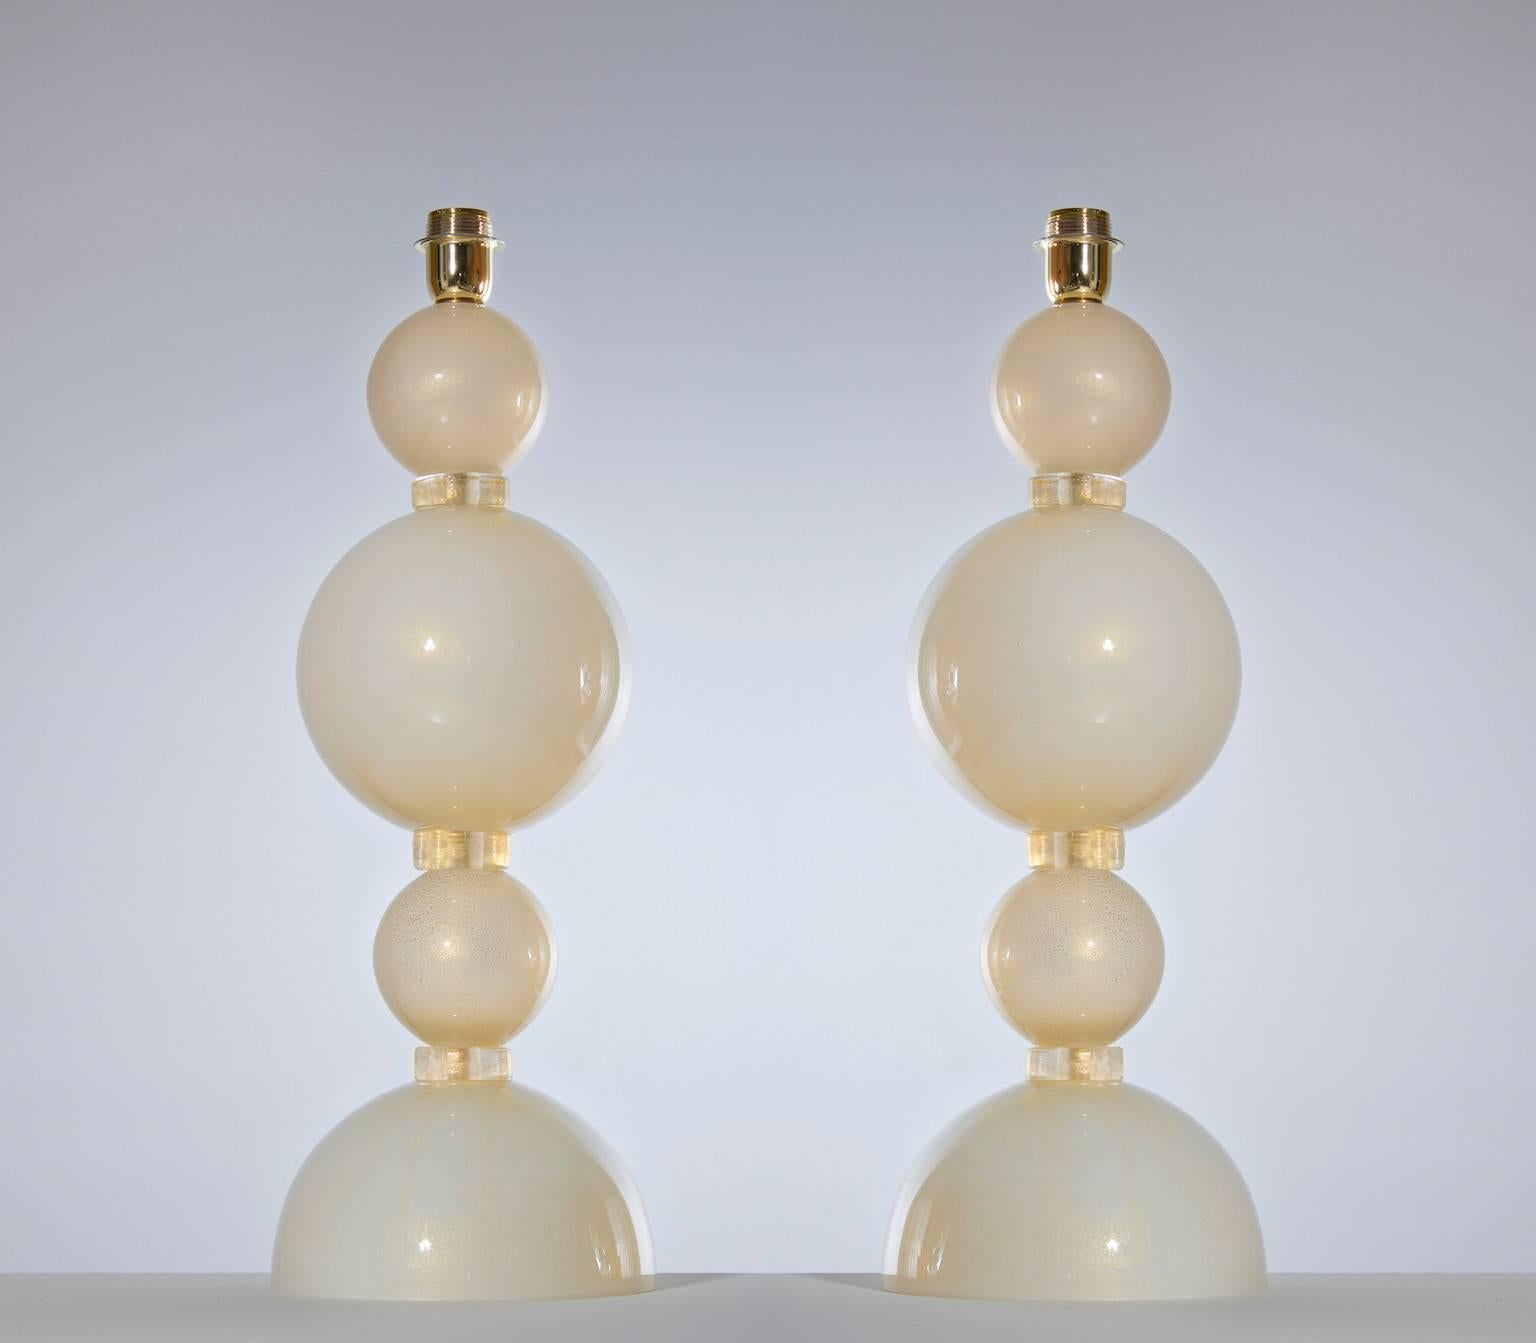 Italian Venetian pair of table lamps, blown Murano glass, ivory and gold, 1970s.
Pair of Italian Murano glass table lamps ivory and gold colored, composed by two spheres and by one big sphere in ivory and gold in the very center, having between the